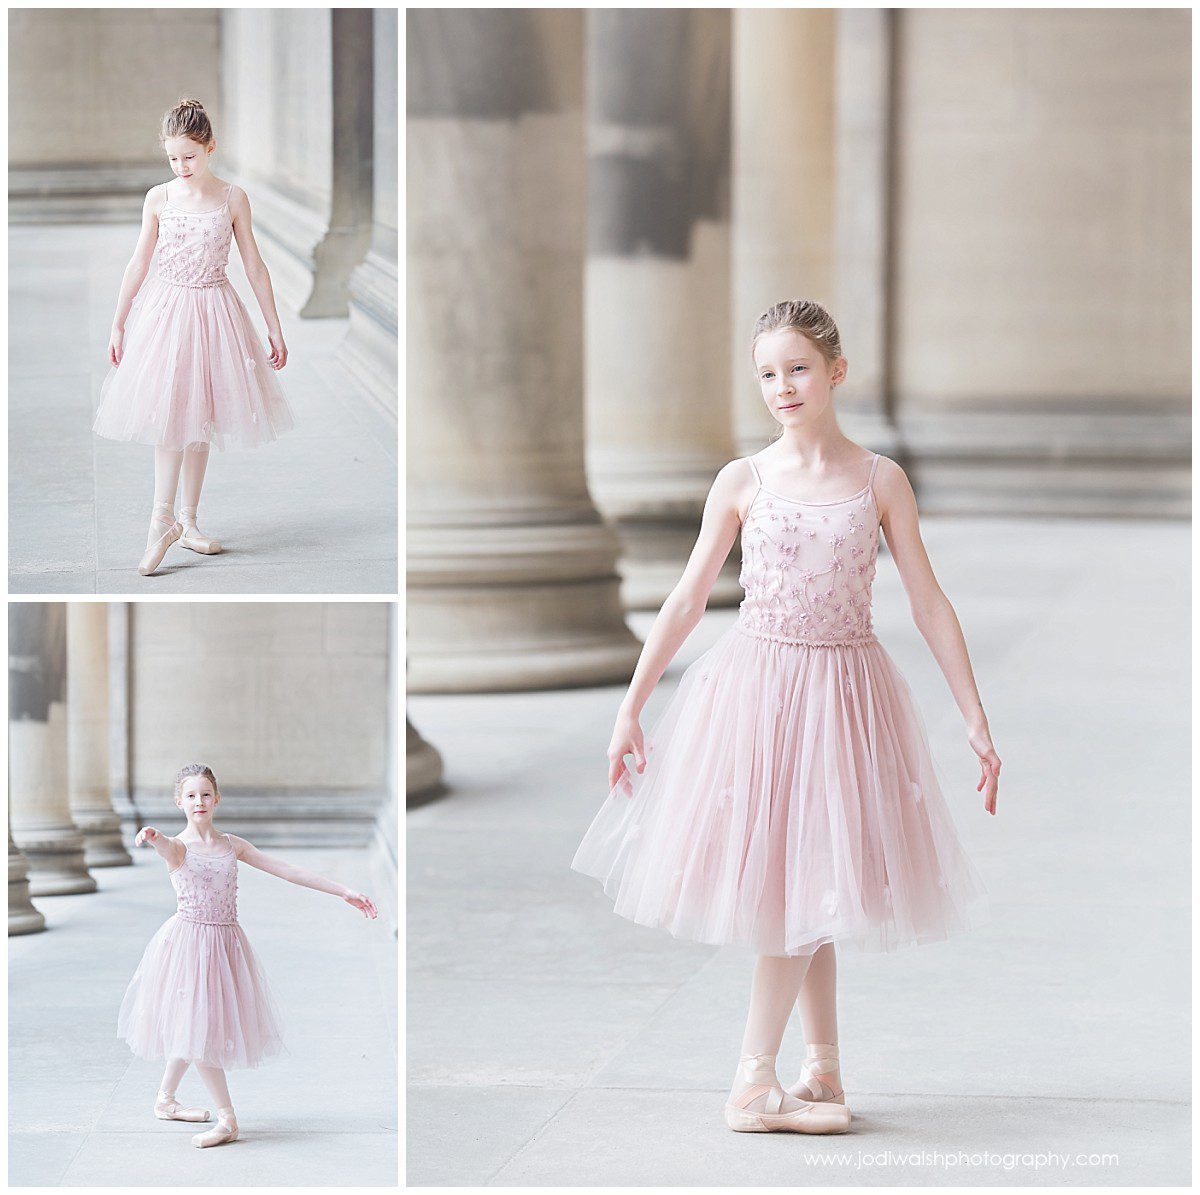 Images from creative dance portraits with Jodi Walsh Photography. this collage of images show a tween ballerina in pink dress dancing in stone hallway in Pittsburgh